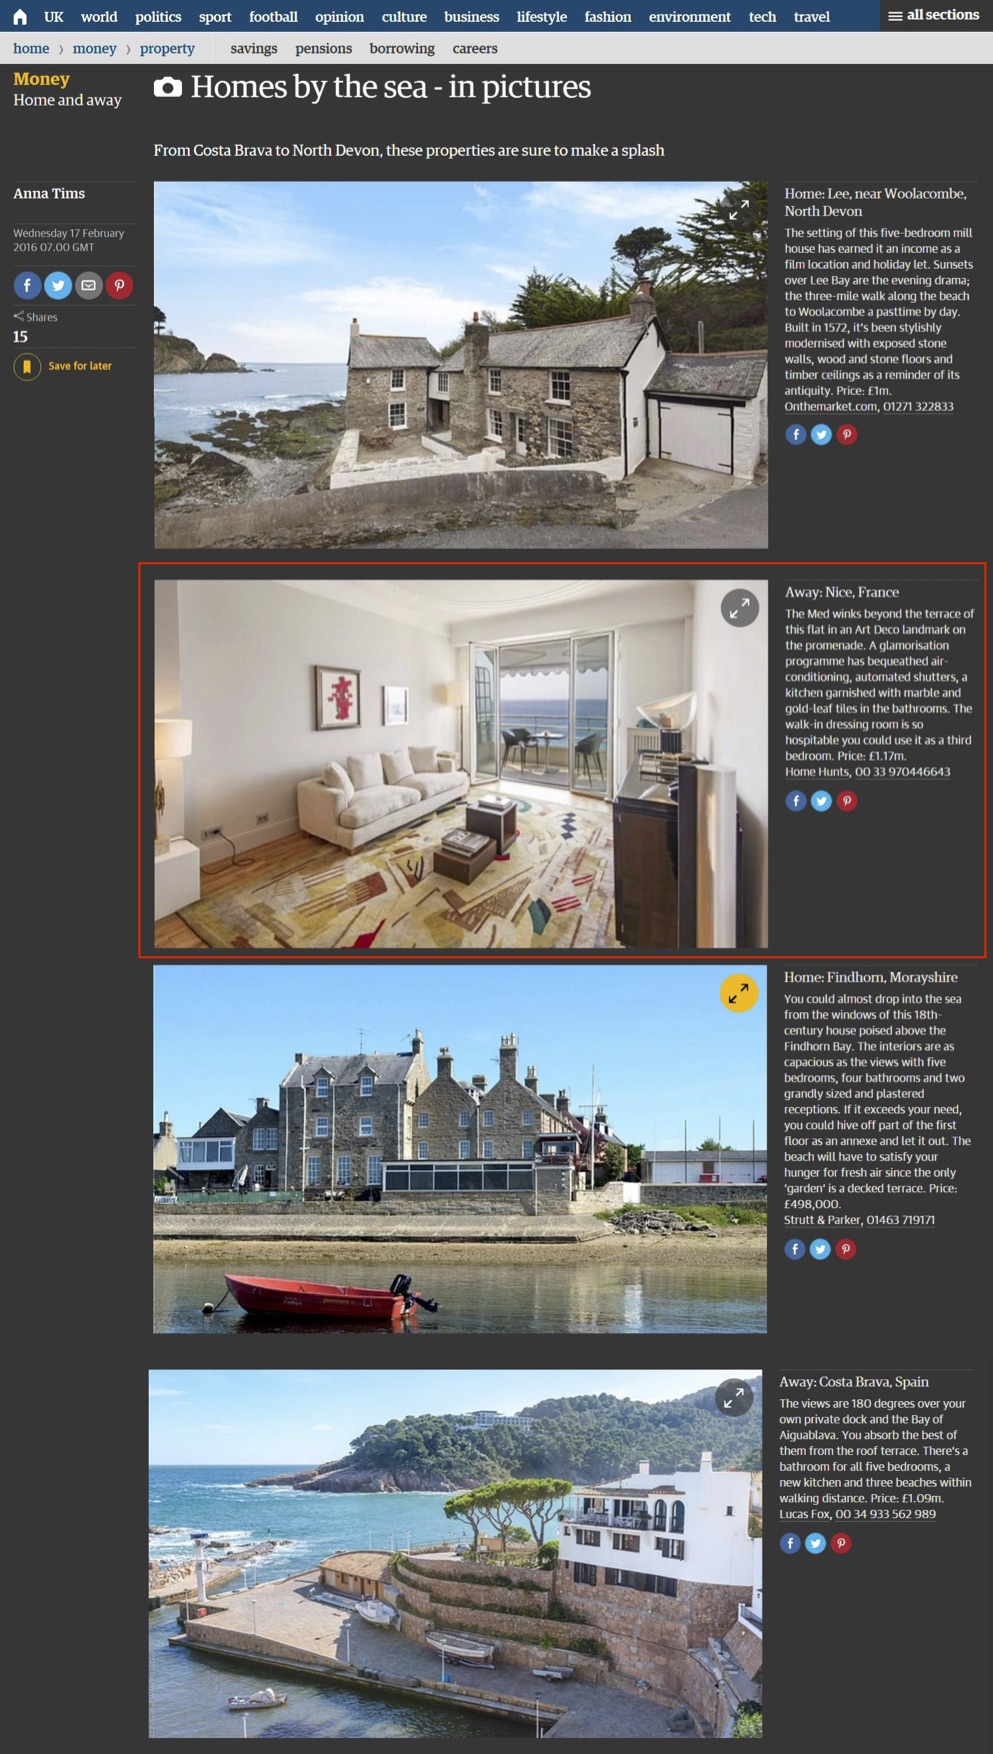 The Guardian – Homes by the sea